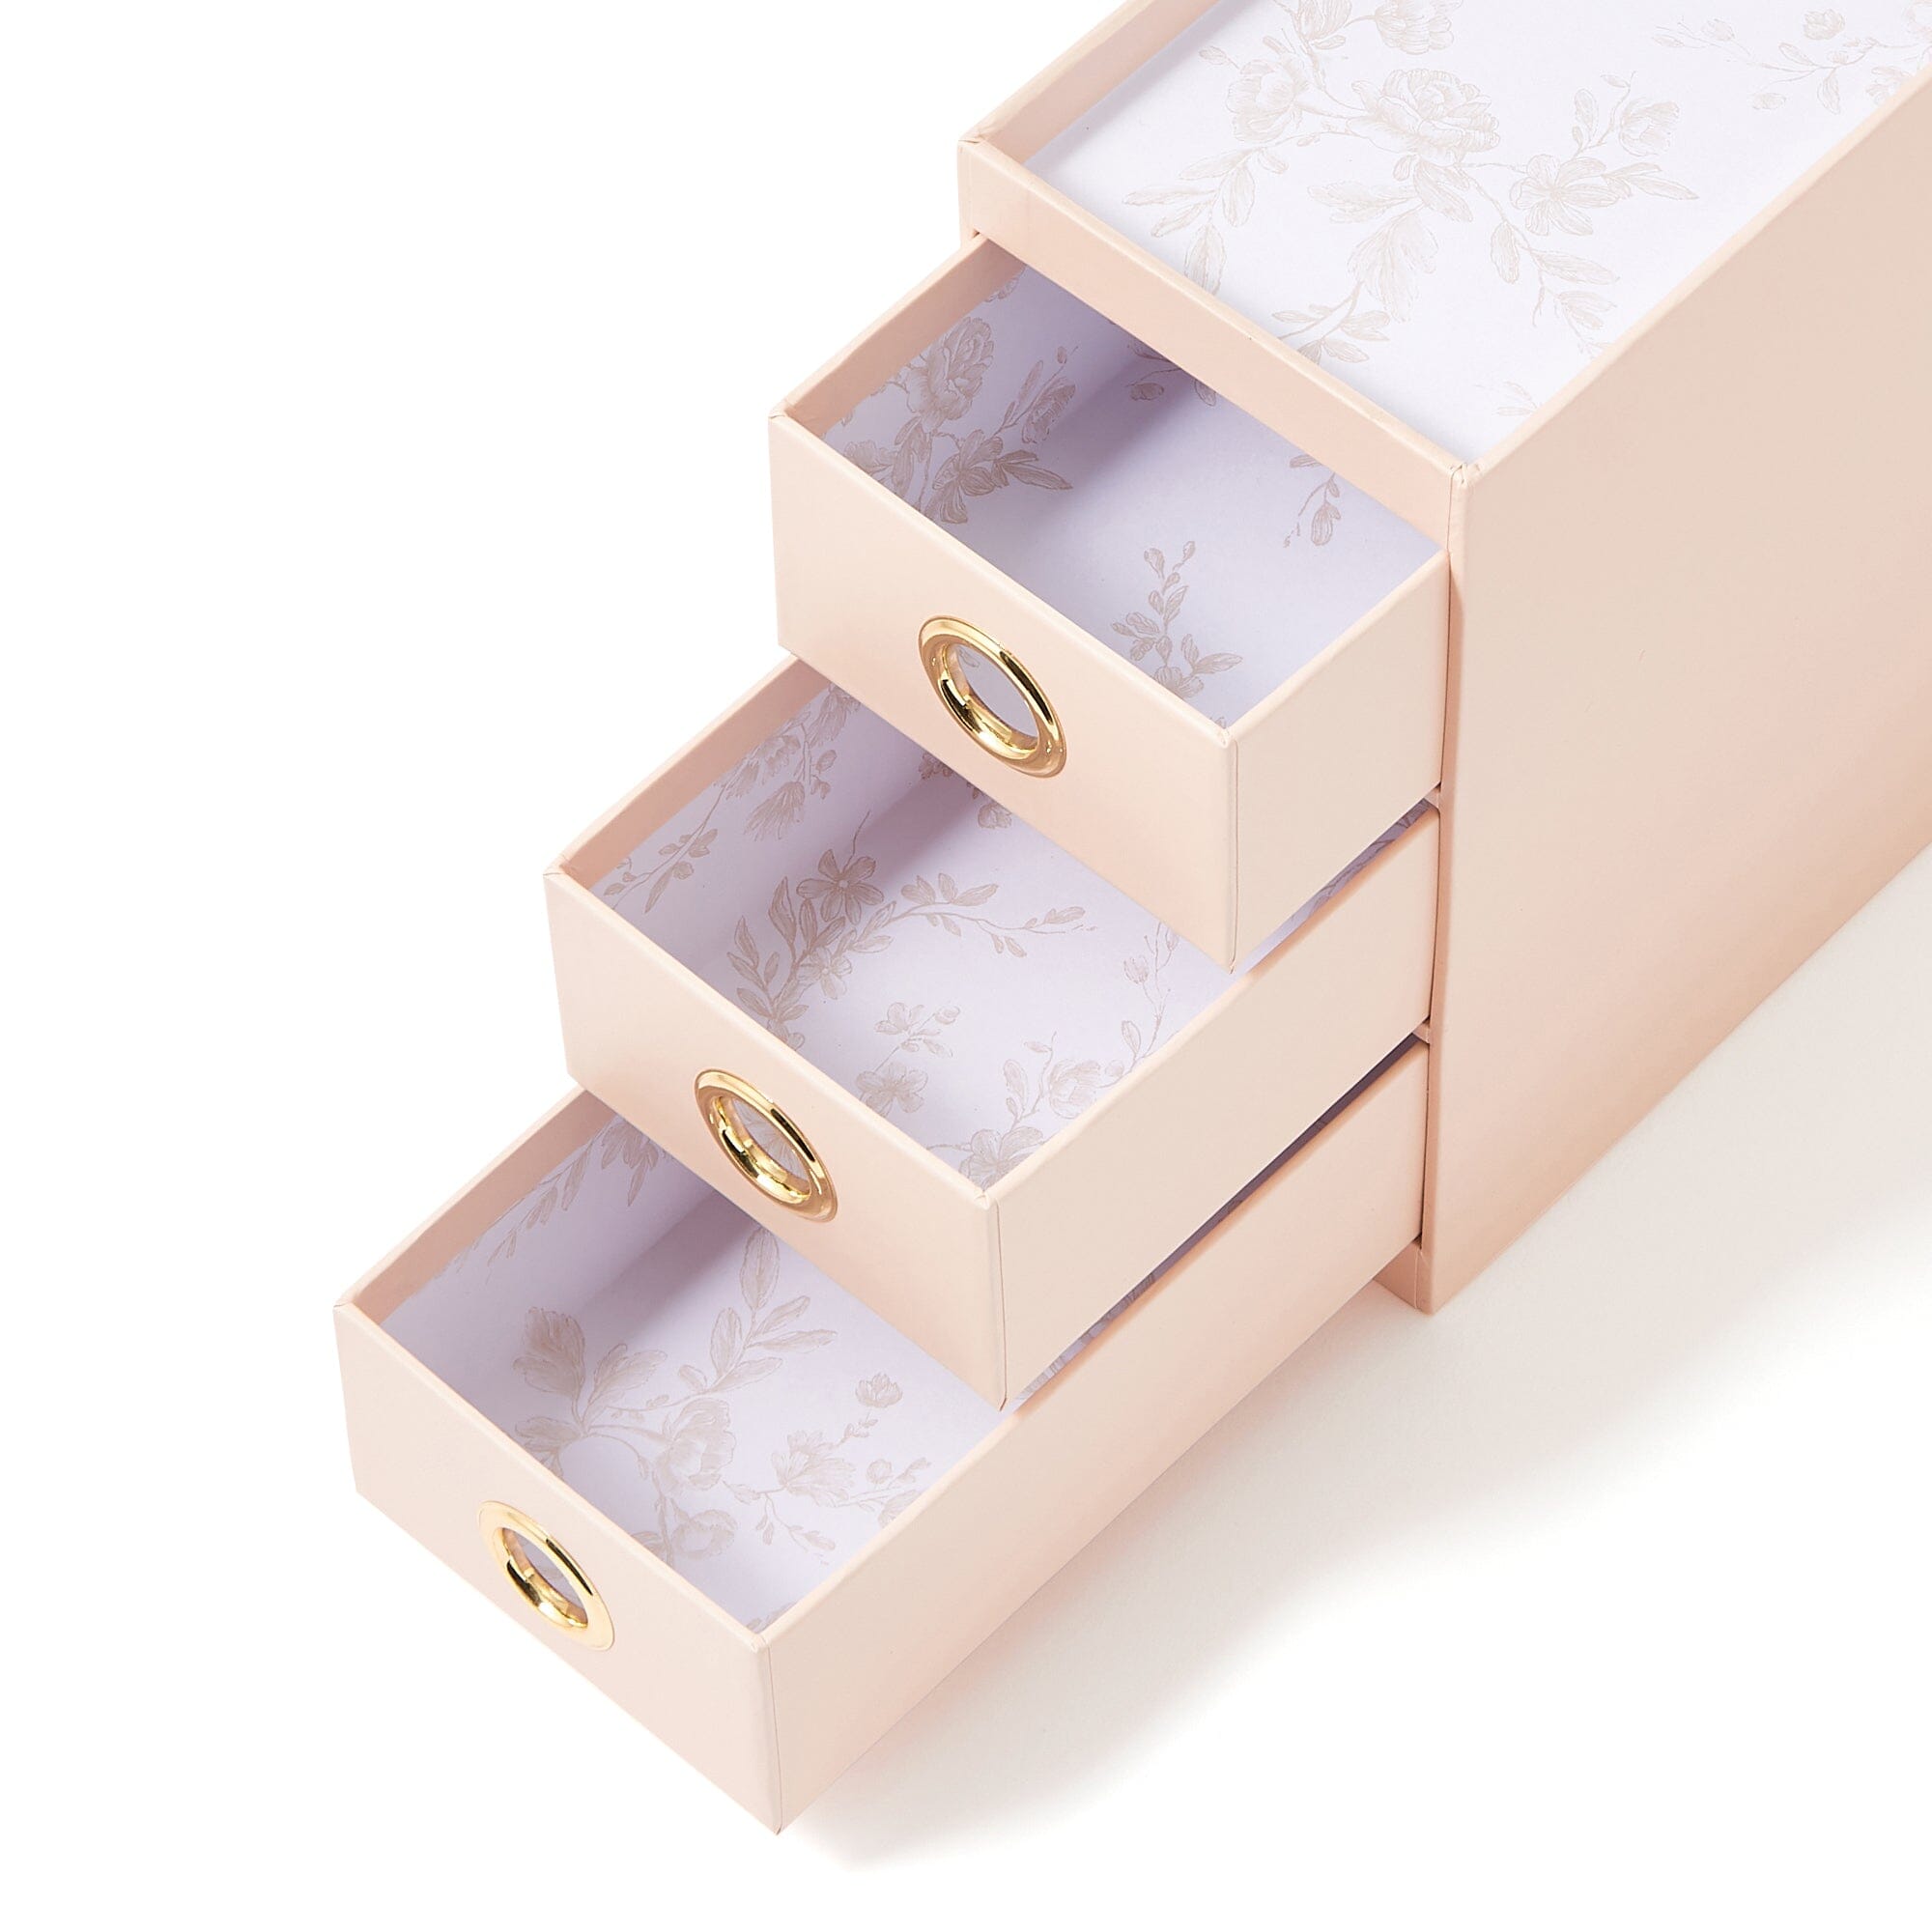 PETITE CHEST WITH PEN STAND 3 TIER BEIGE